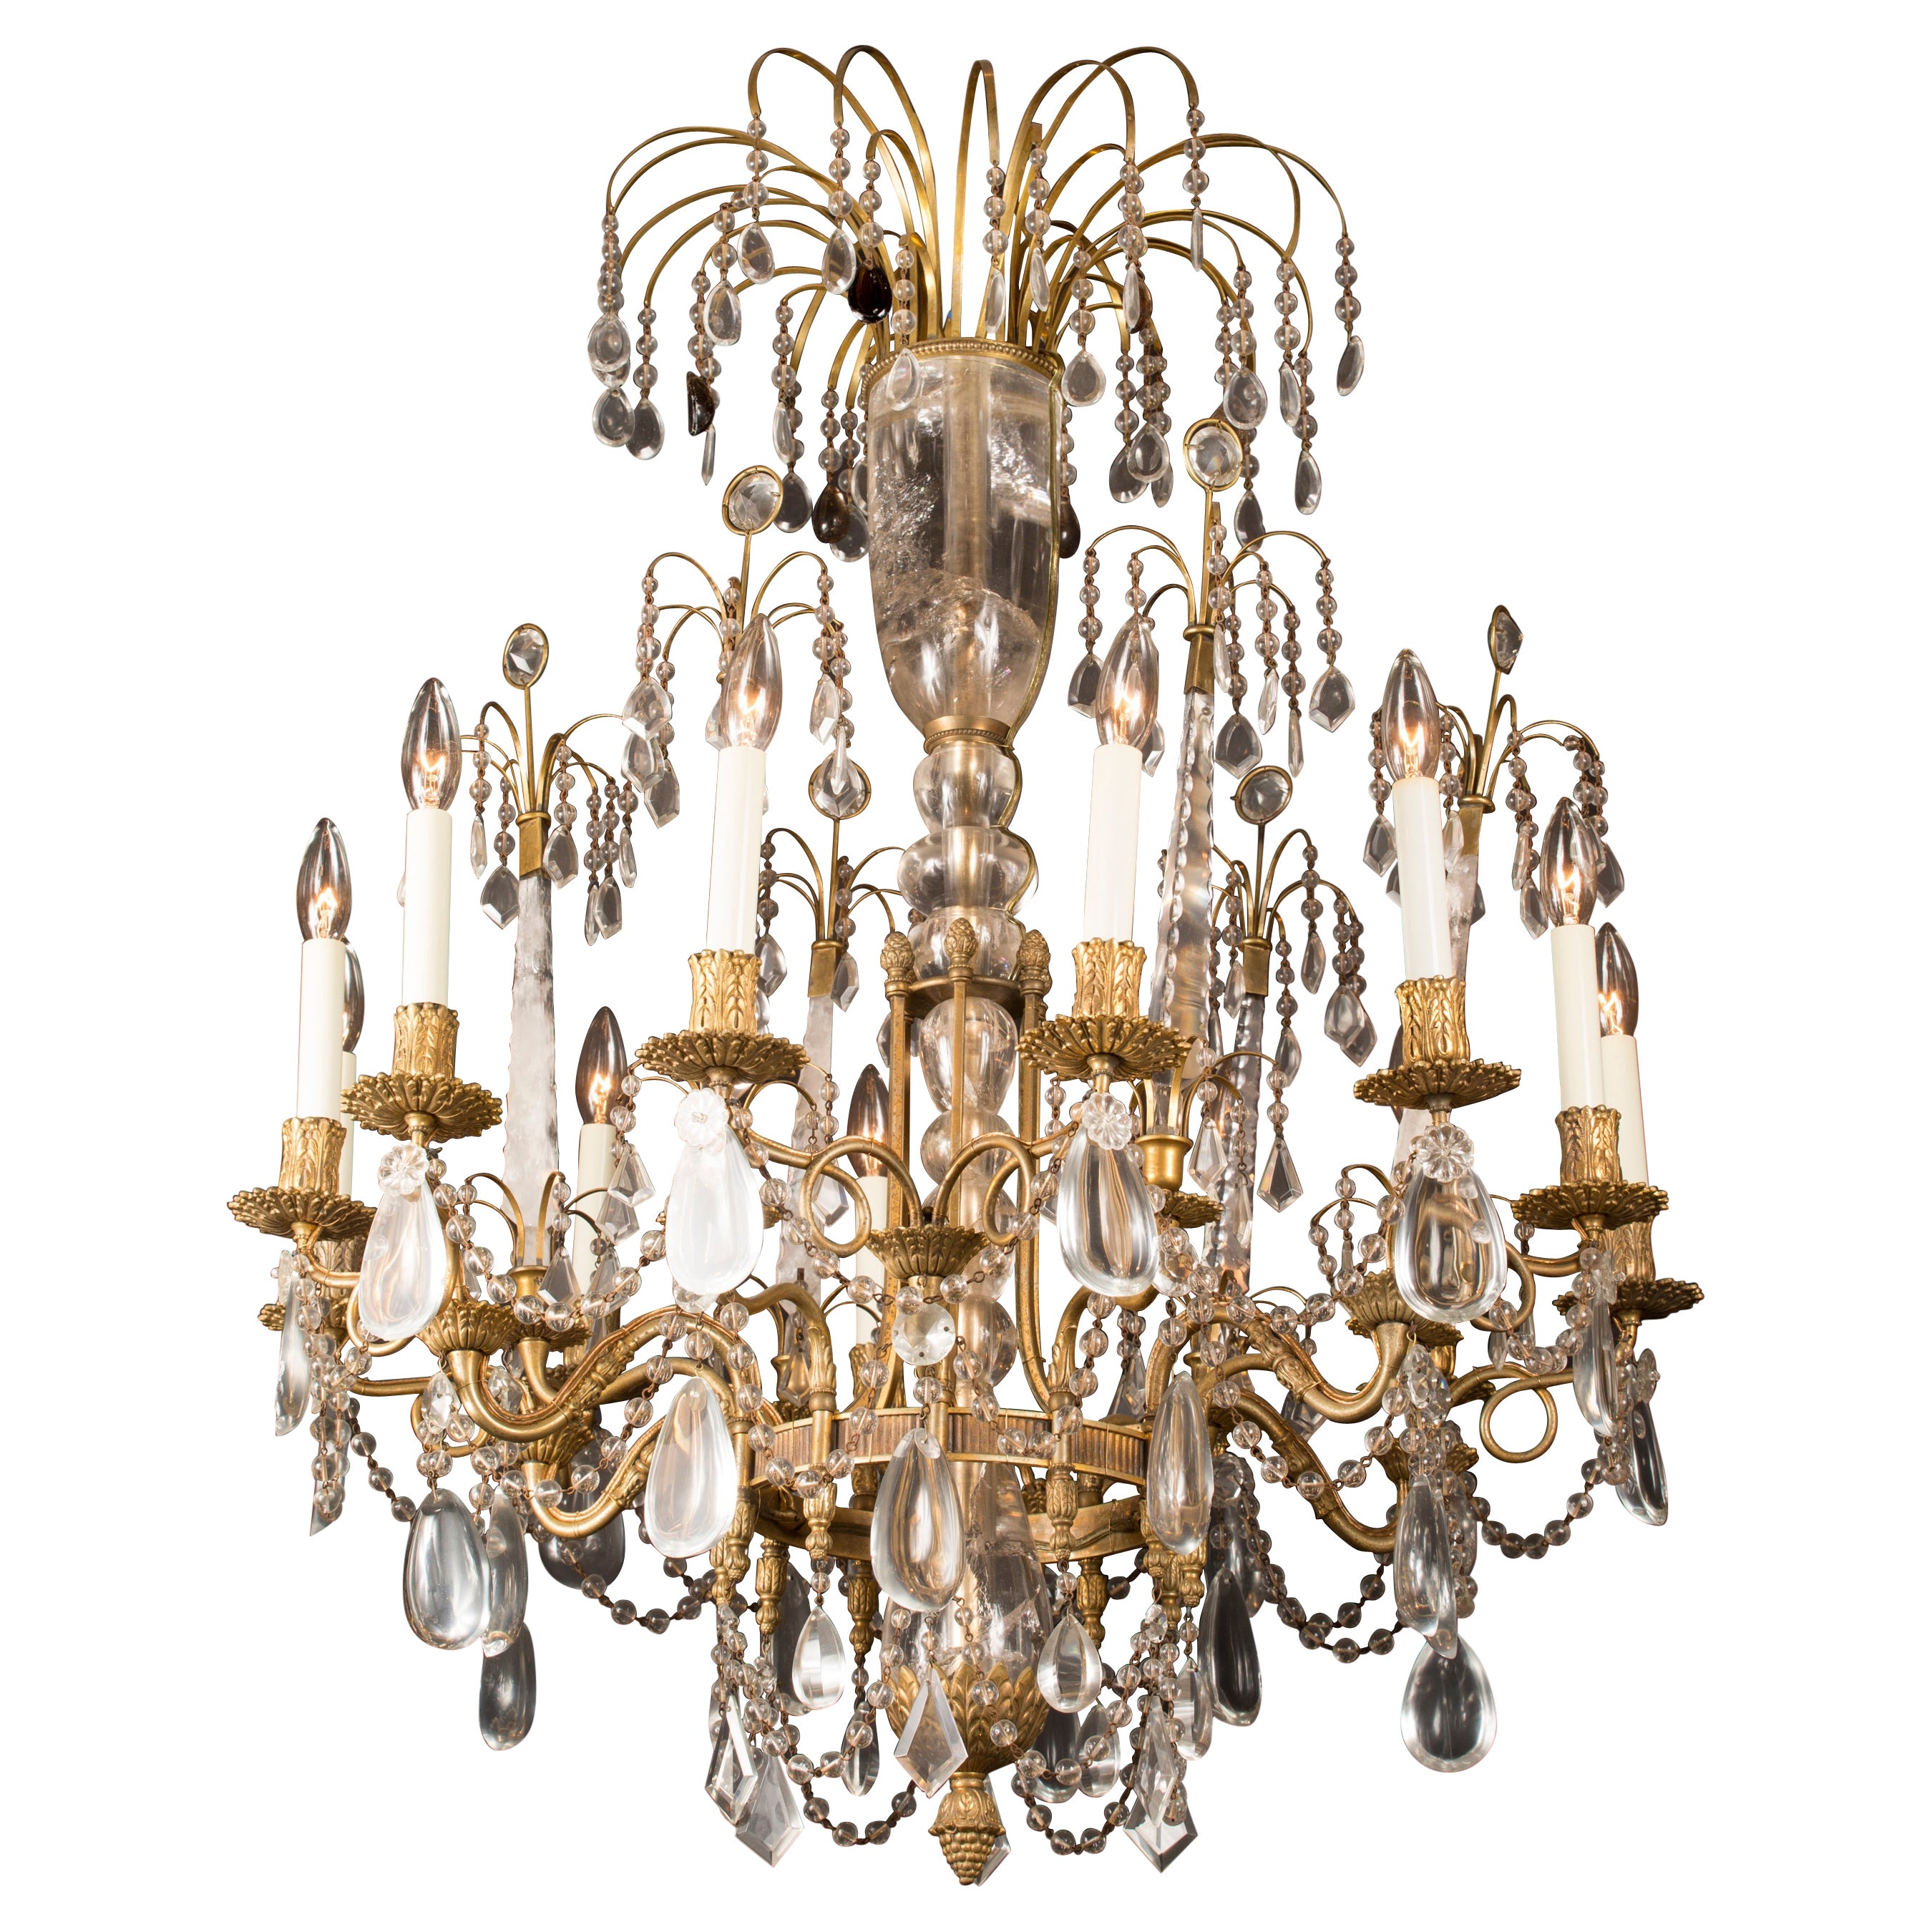 Rock Crystal and Bronze D’Ore Chandelier, Russian 19th Century